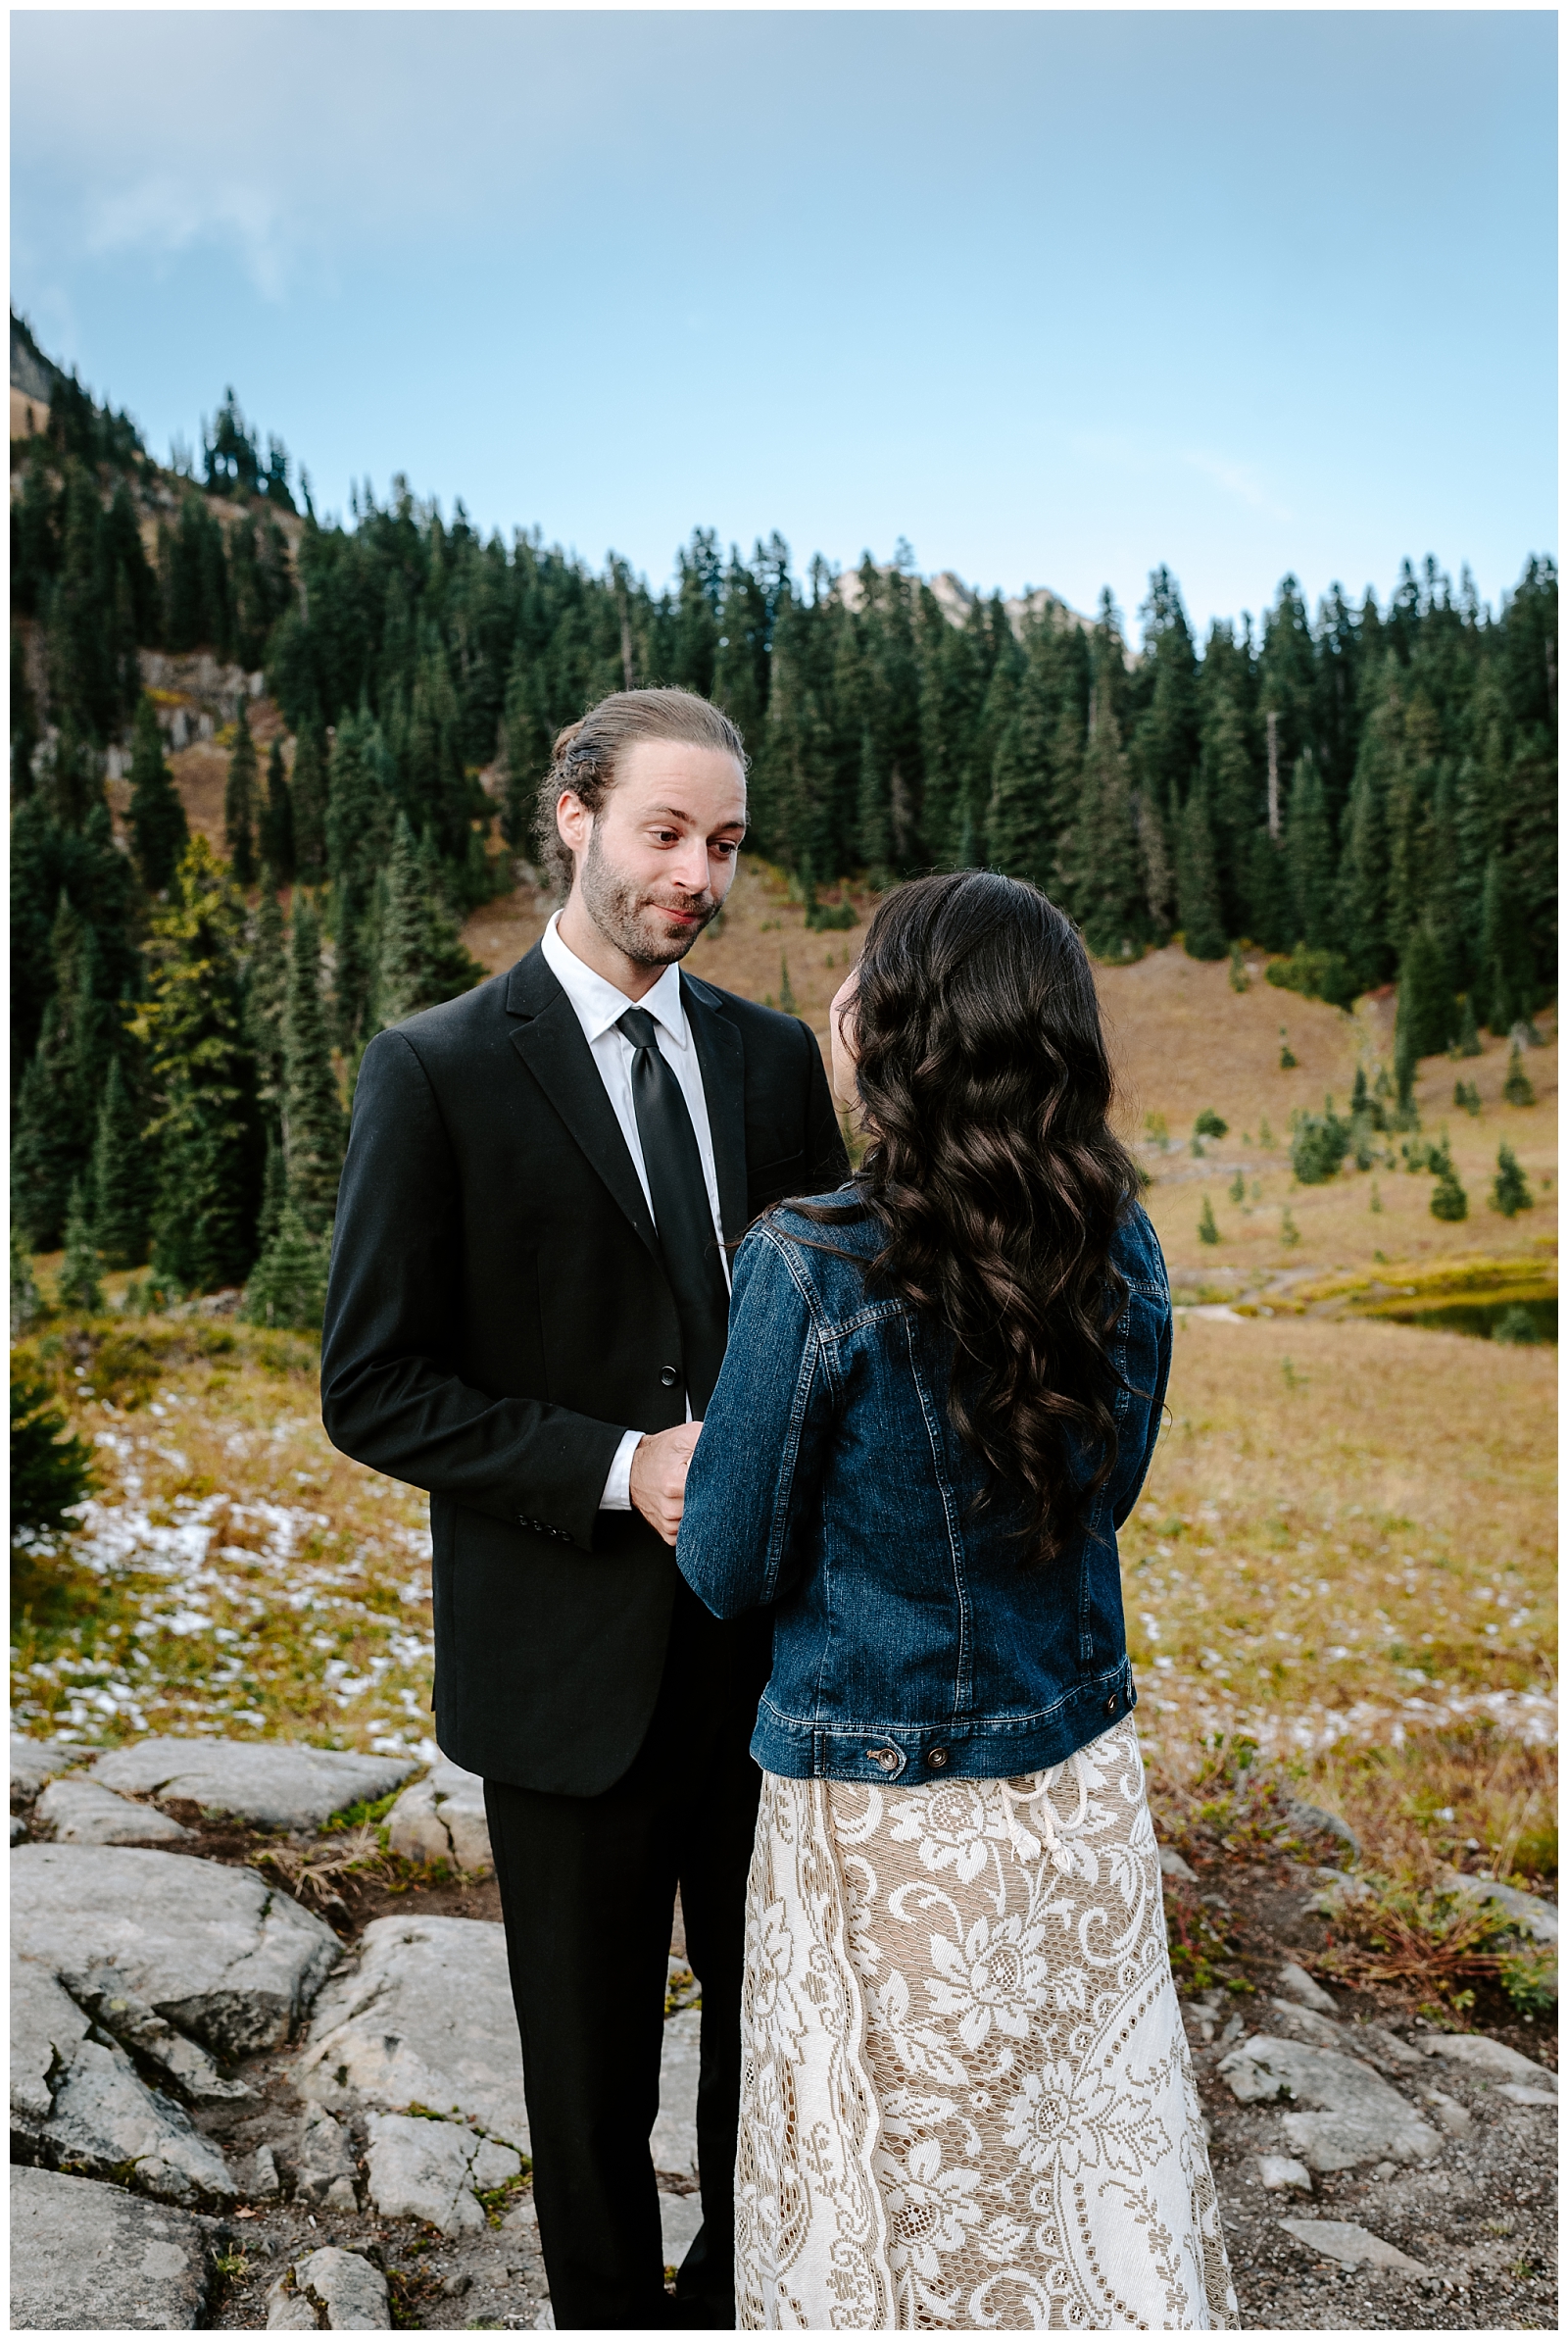 hiking elopement in the pnw